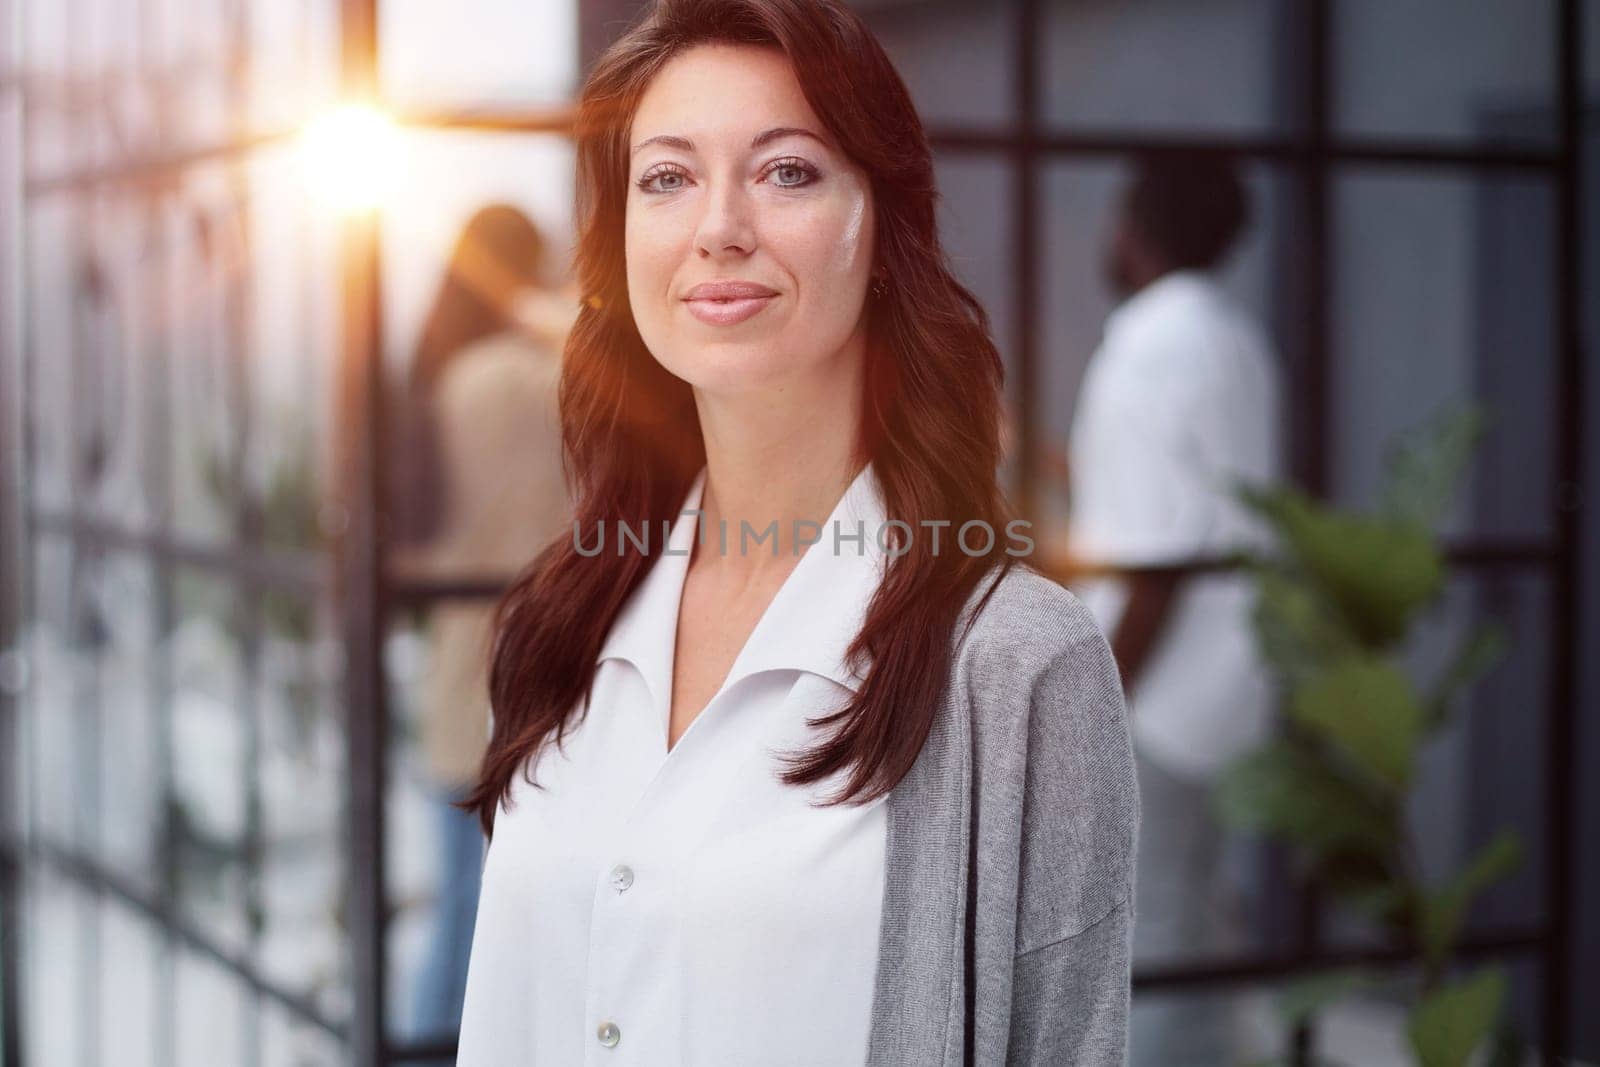 Portrait of a serious lady posing against the backdrop of a modern office.